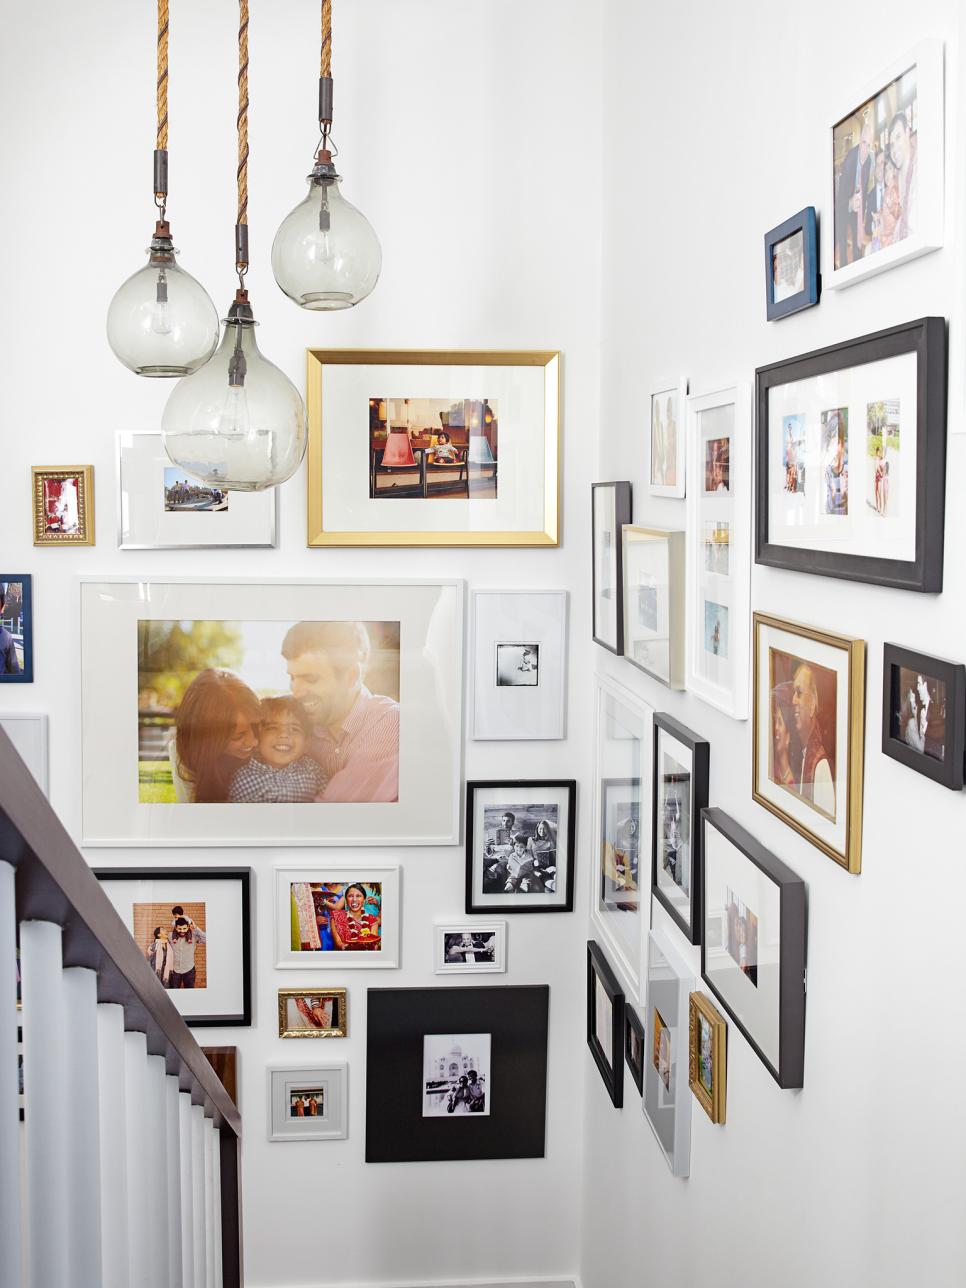 Corner stairway with lots of framed pictures and lamps.